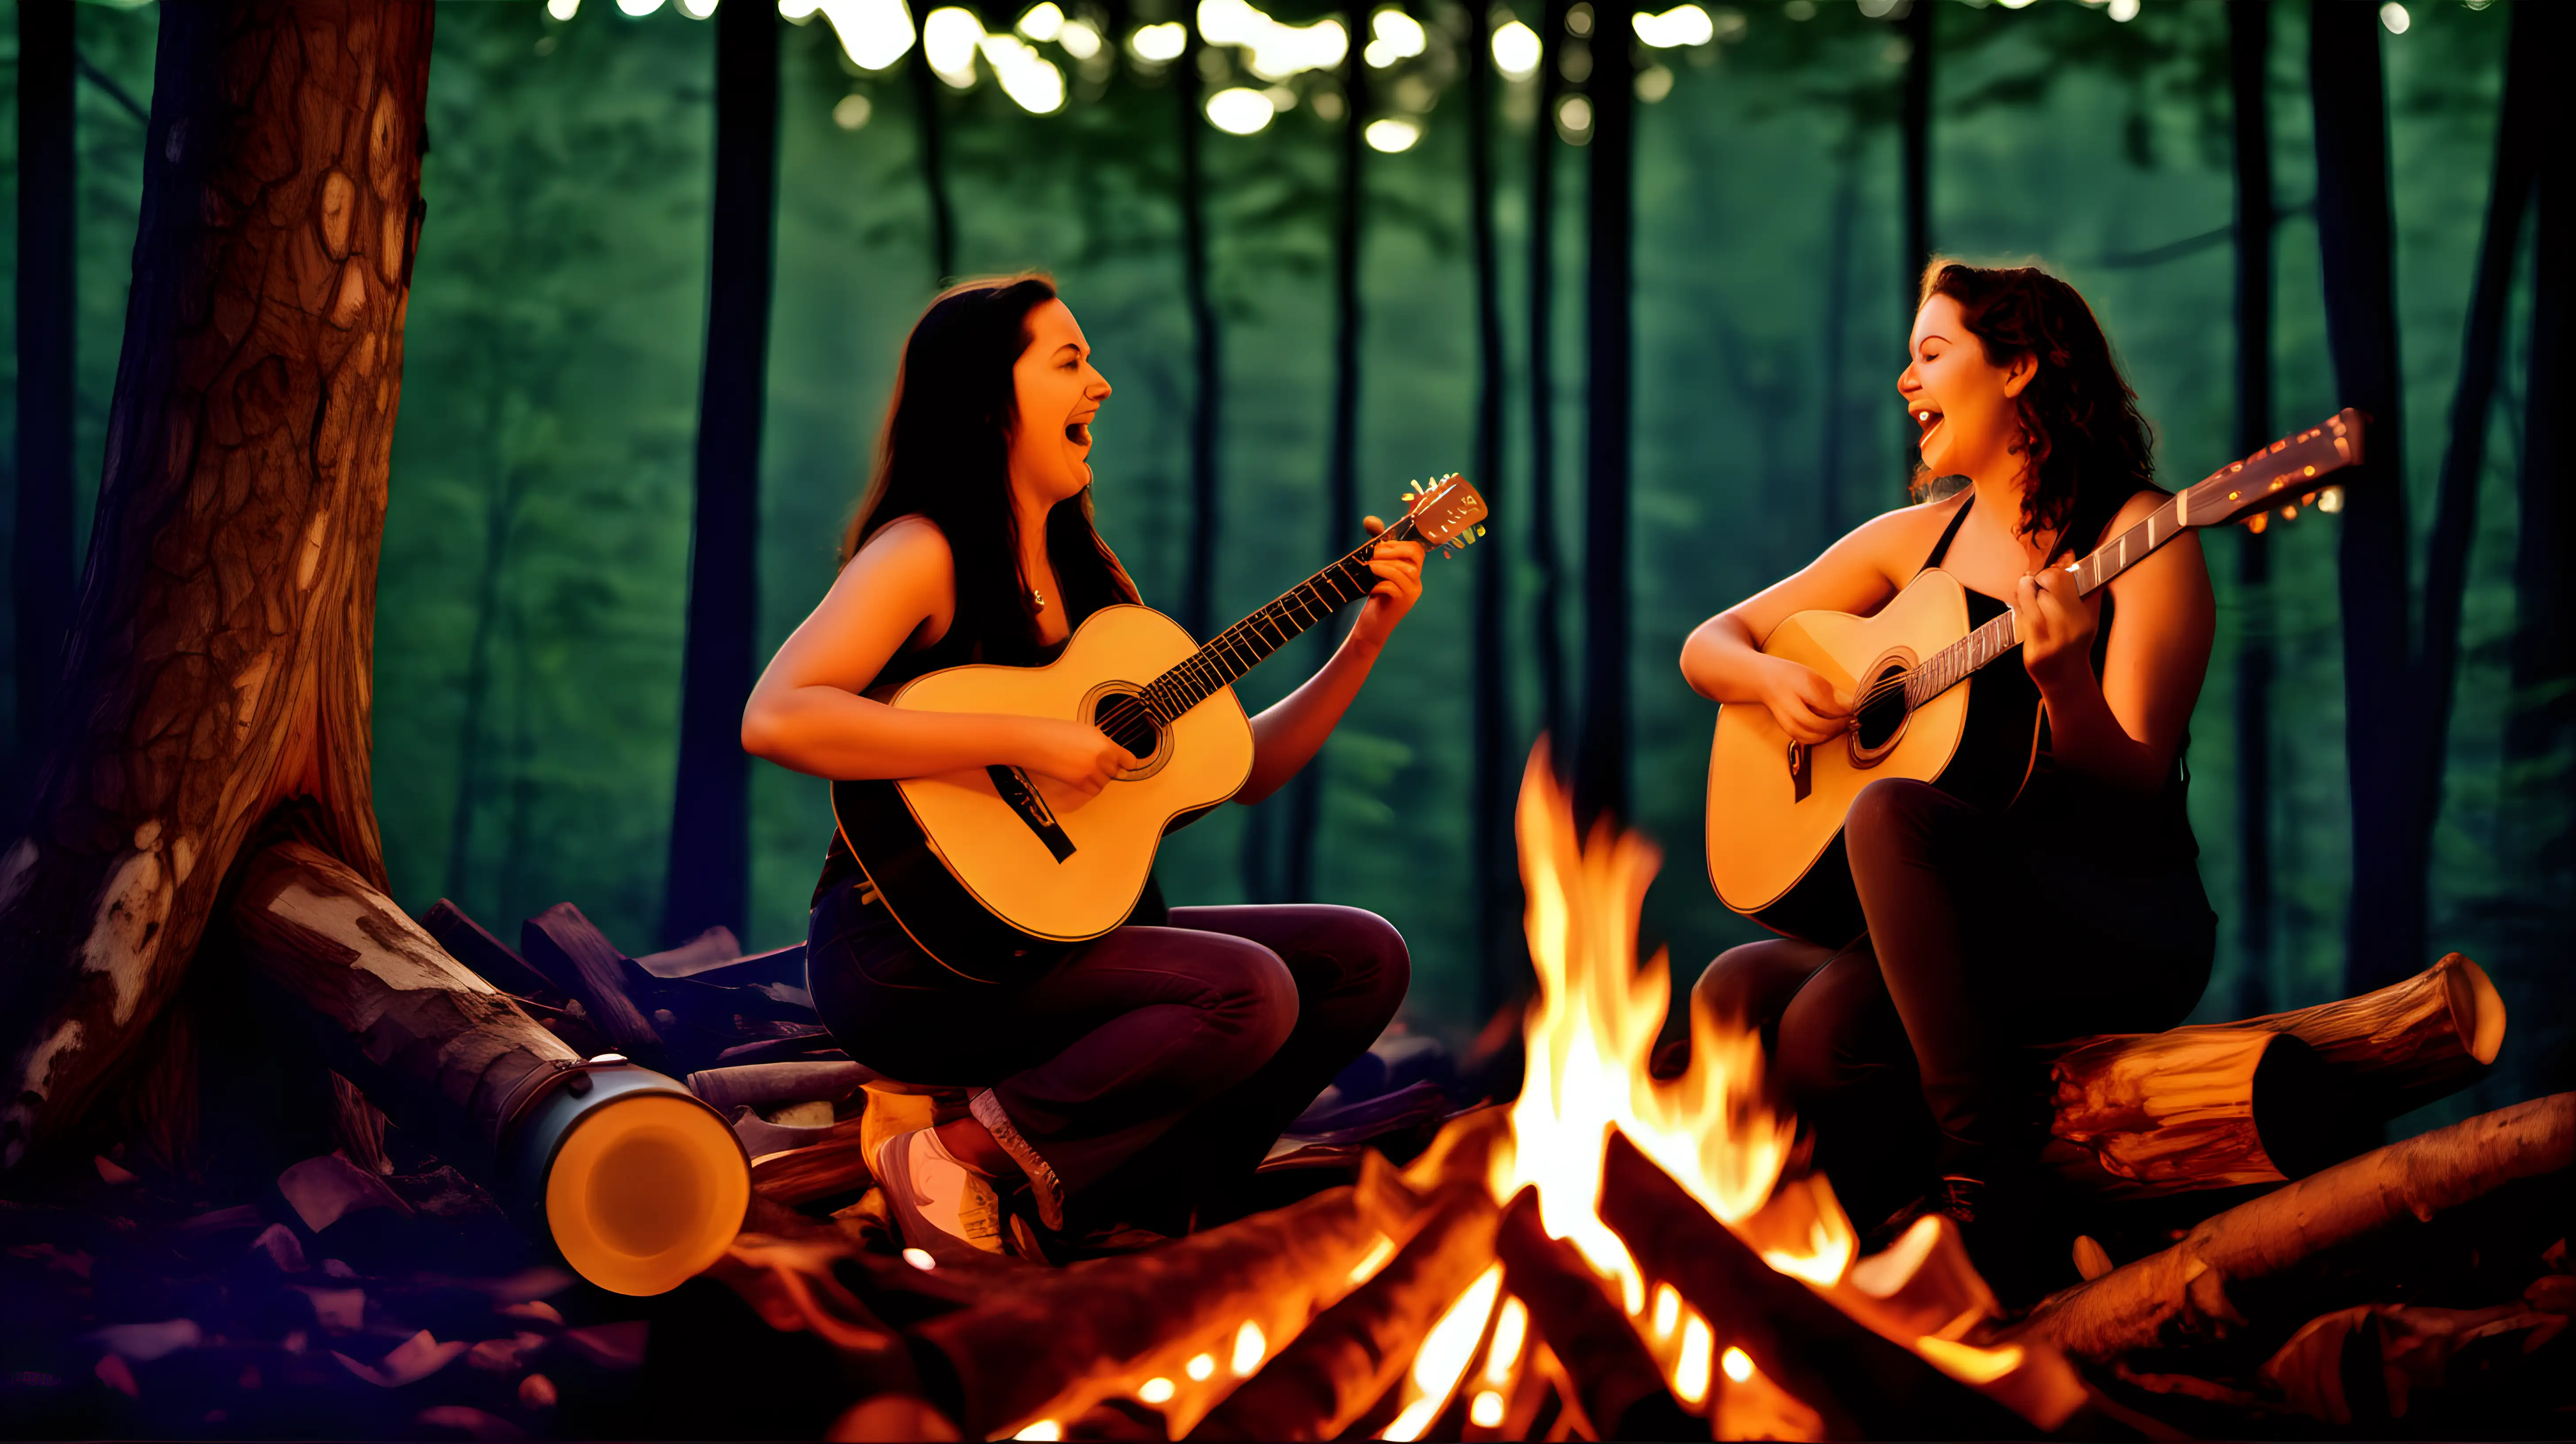 /imagine prompt: A high-definition image of two women sharing a soulful duet by a campfire in the heart of the forest, one strumming a guitar, the other with a tambourine, their joyous expressions lit by the fire's glow against the twilight forest backdrop. Created Using: intimate concert photography, forest setting, campfire glow, joyous expressions, musical instruments, twilight ambiance, rustic elegance, shared connection, hd quality, natural look --ar 4:3 --v 6.0